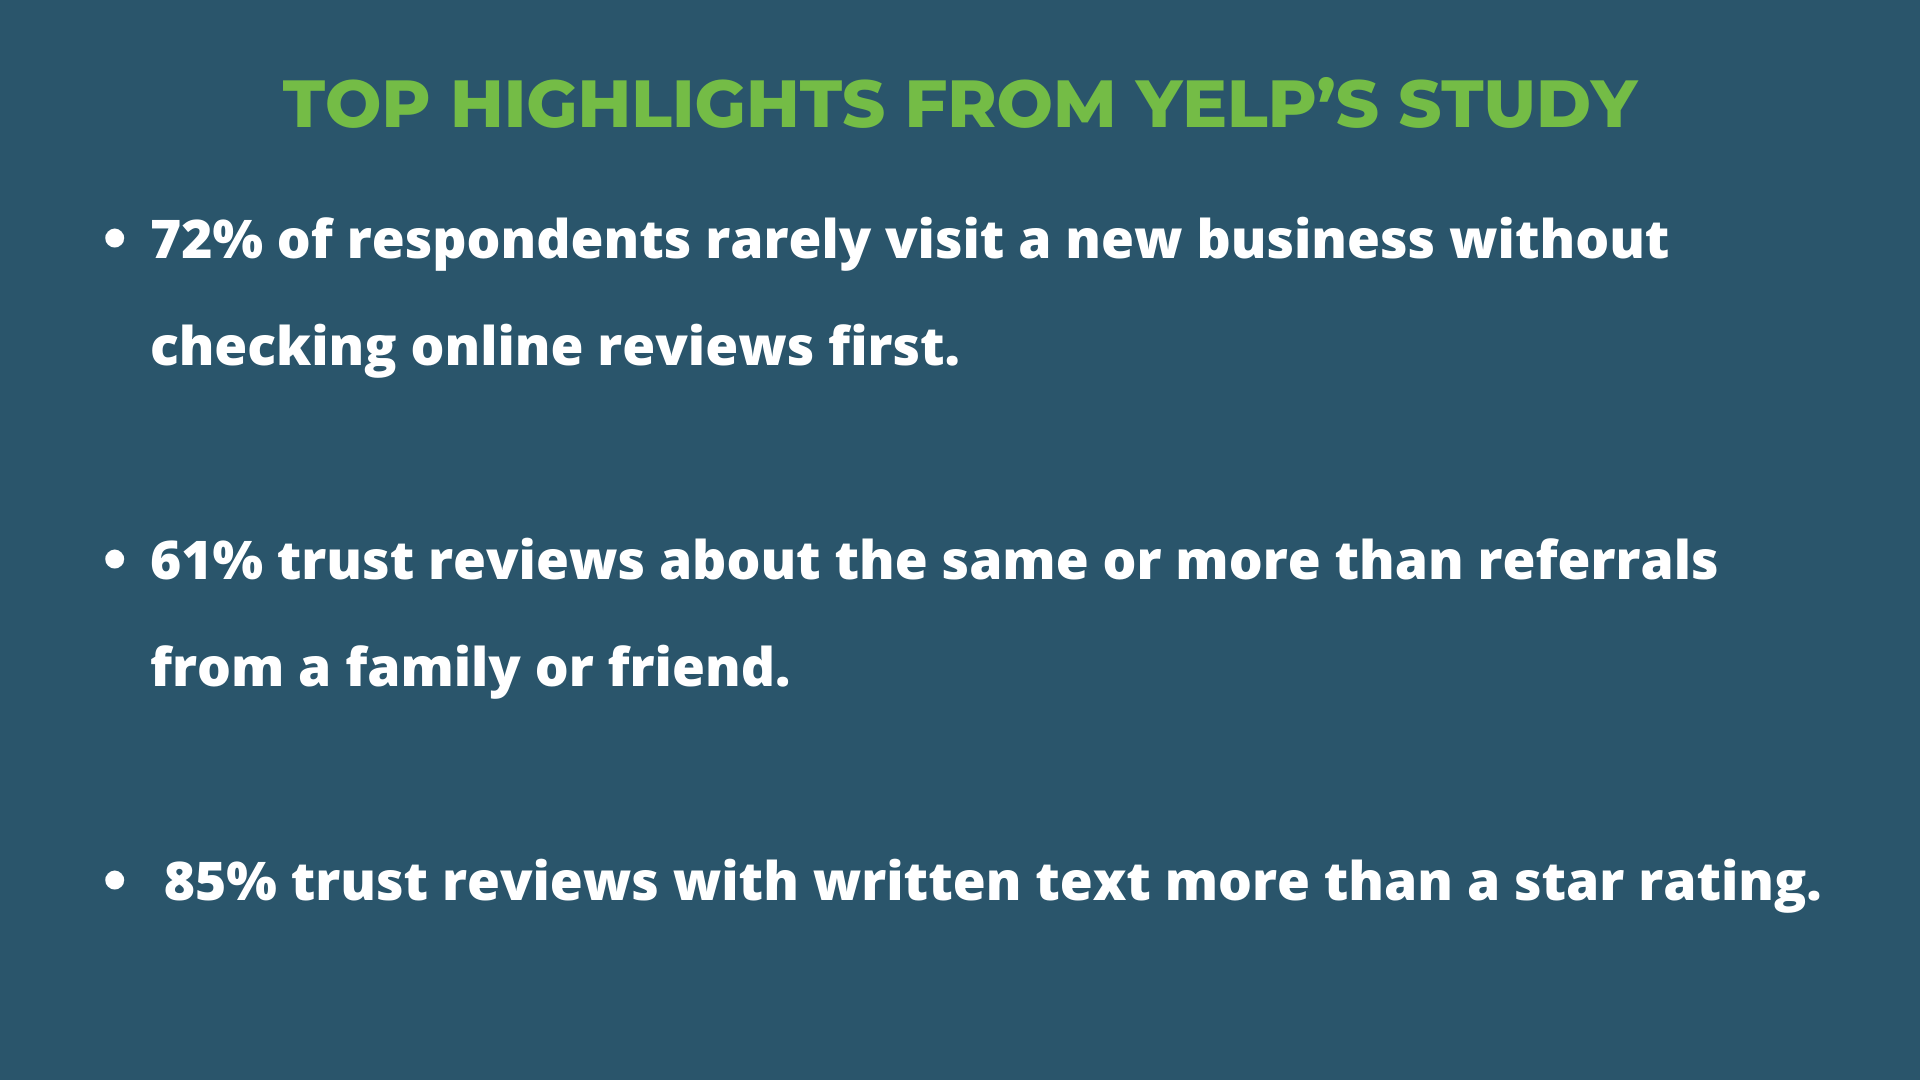 A blue box with white text highlighting the top findings from Yelp's study